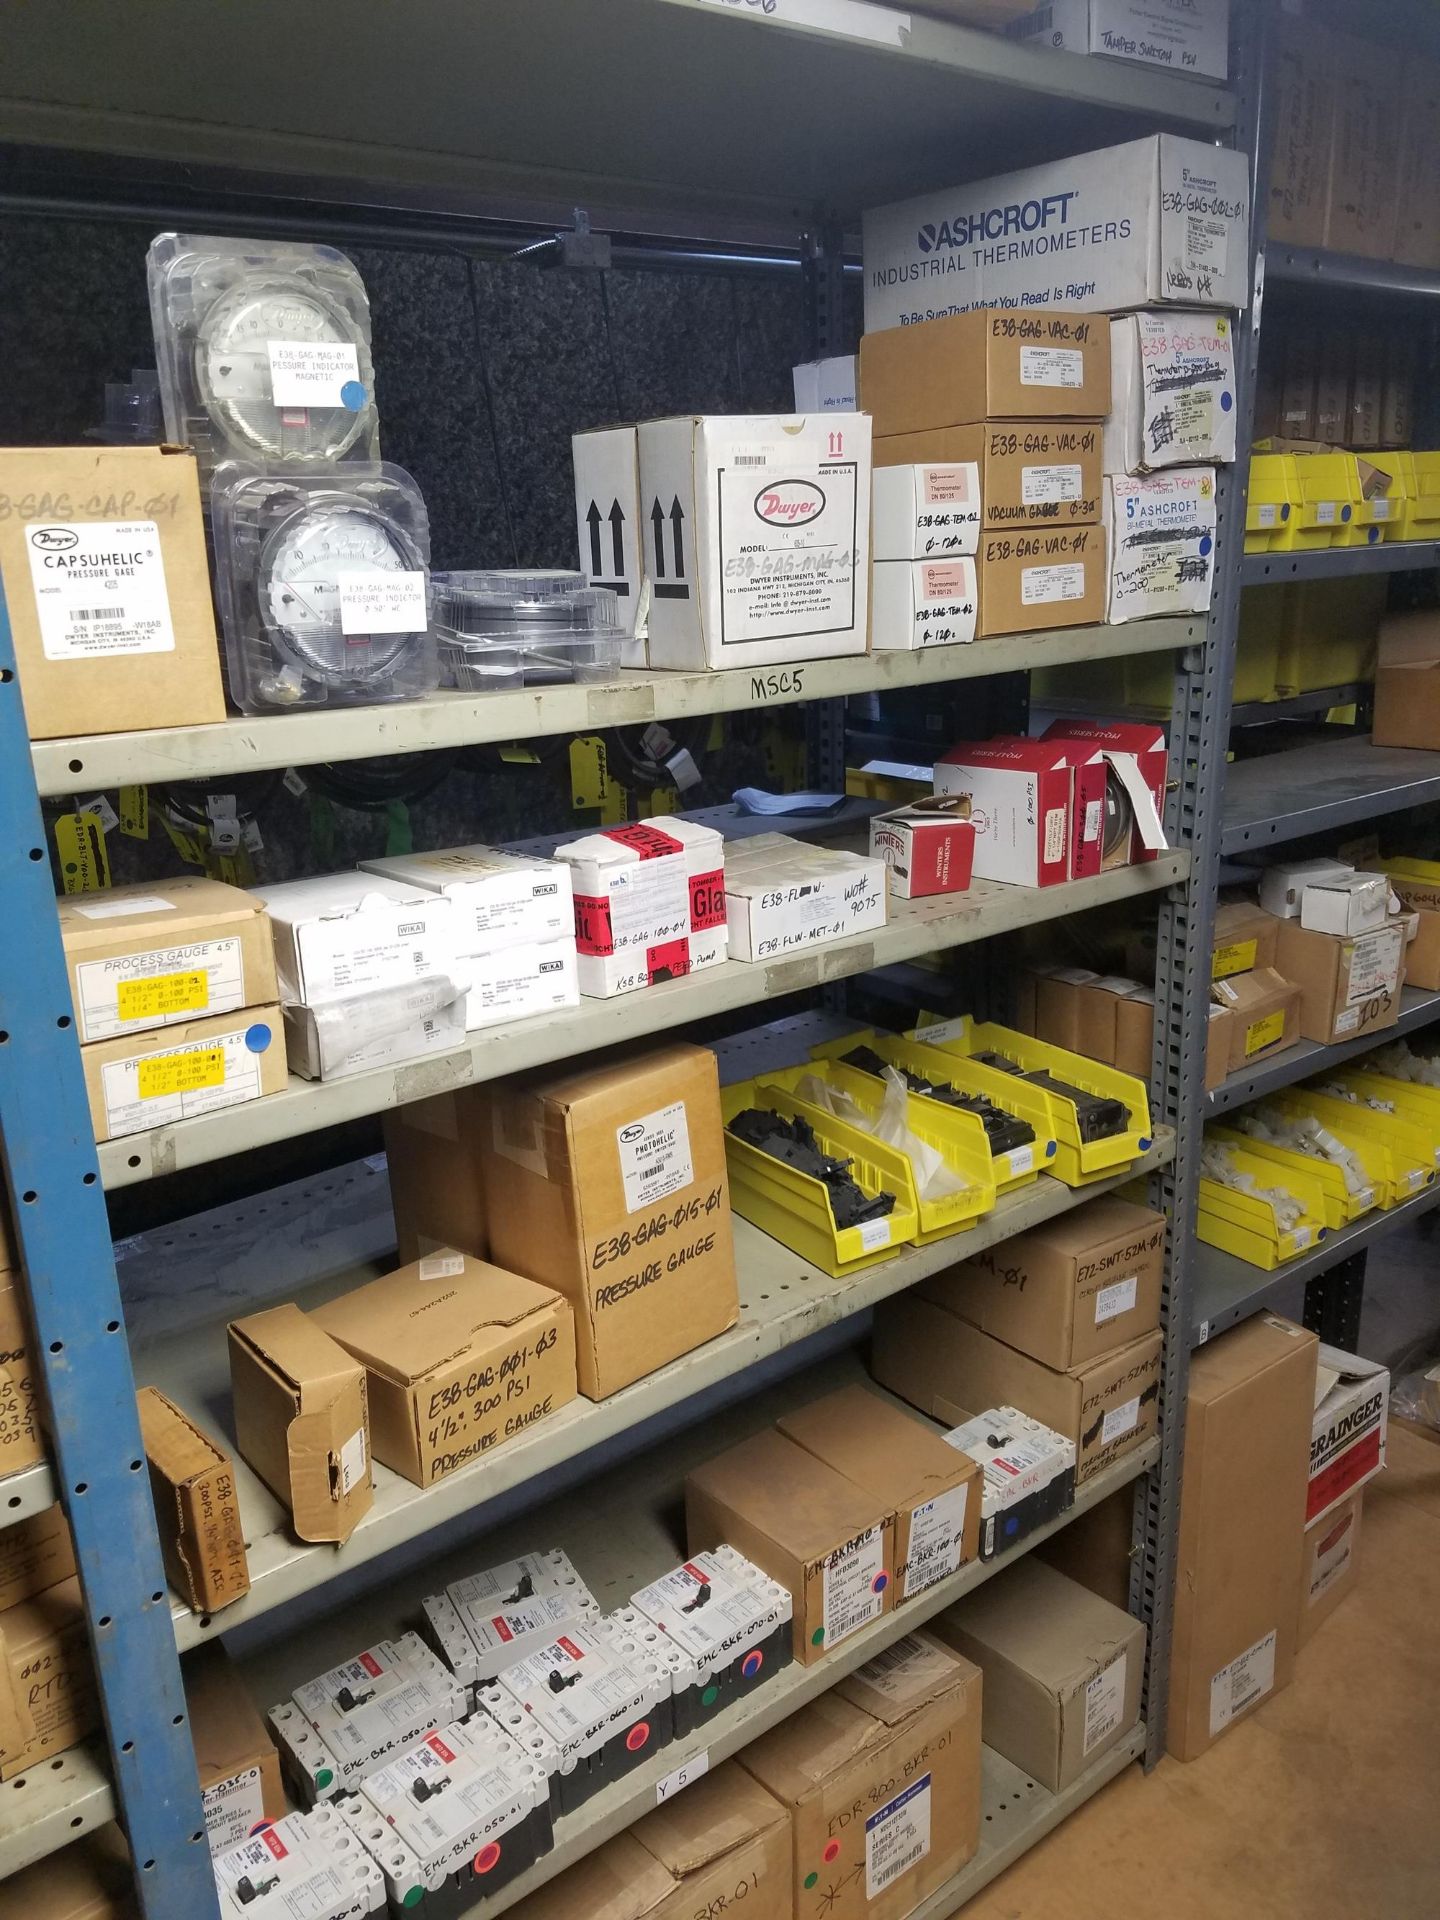 Contents of Spare Parts Storage Area On Mezzanine | Rig Fee: $400 - Image 17 of 19